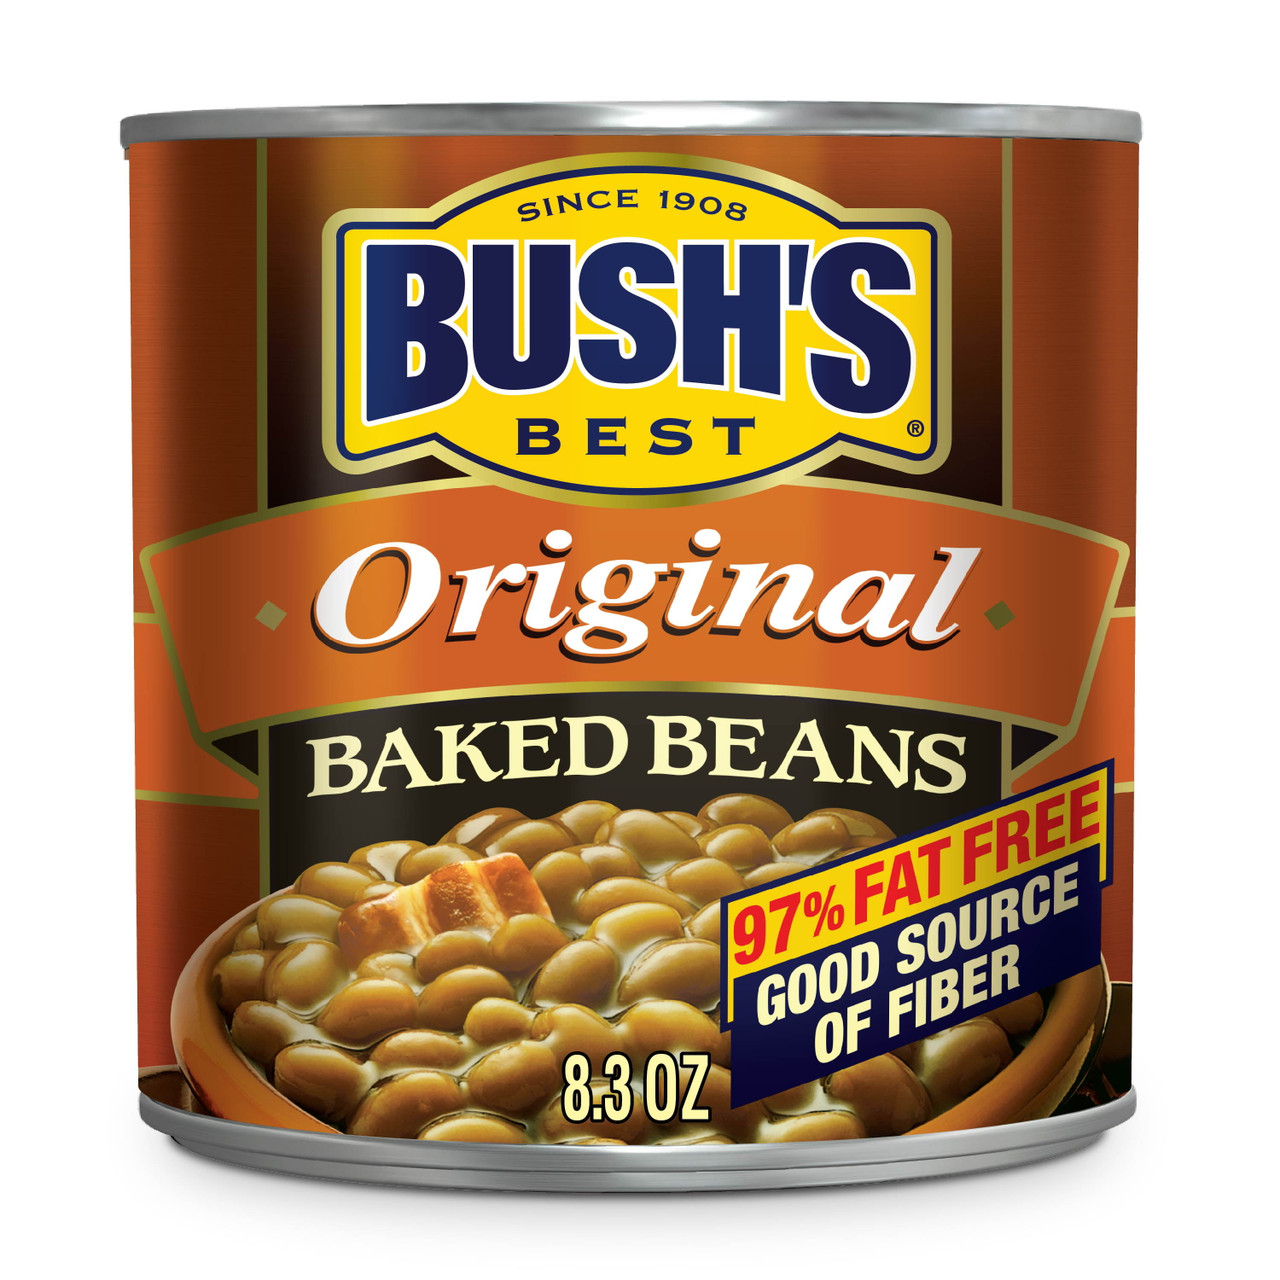 Bush's Original Baked Beans with Bacon and Brown Sugar, 8.3 oz - [From 9.00 - Choose pk Qty ] - *Ships from Miami